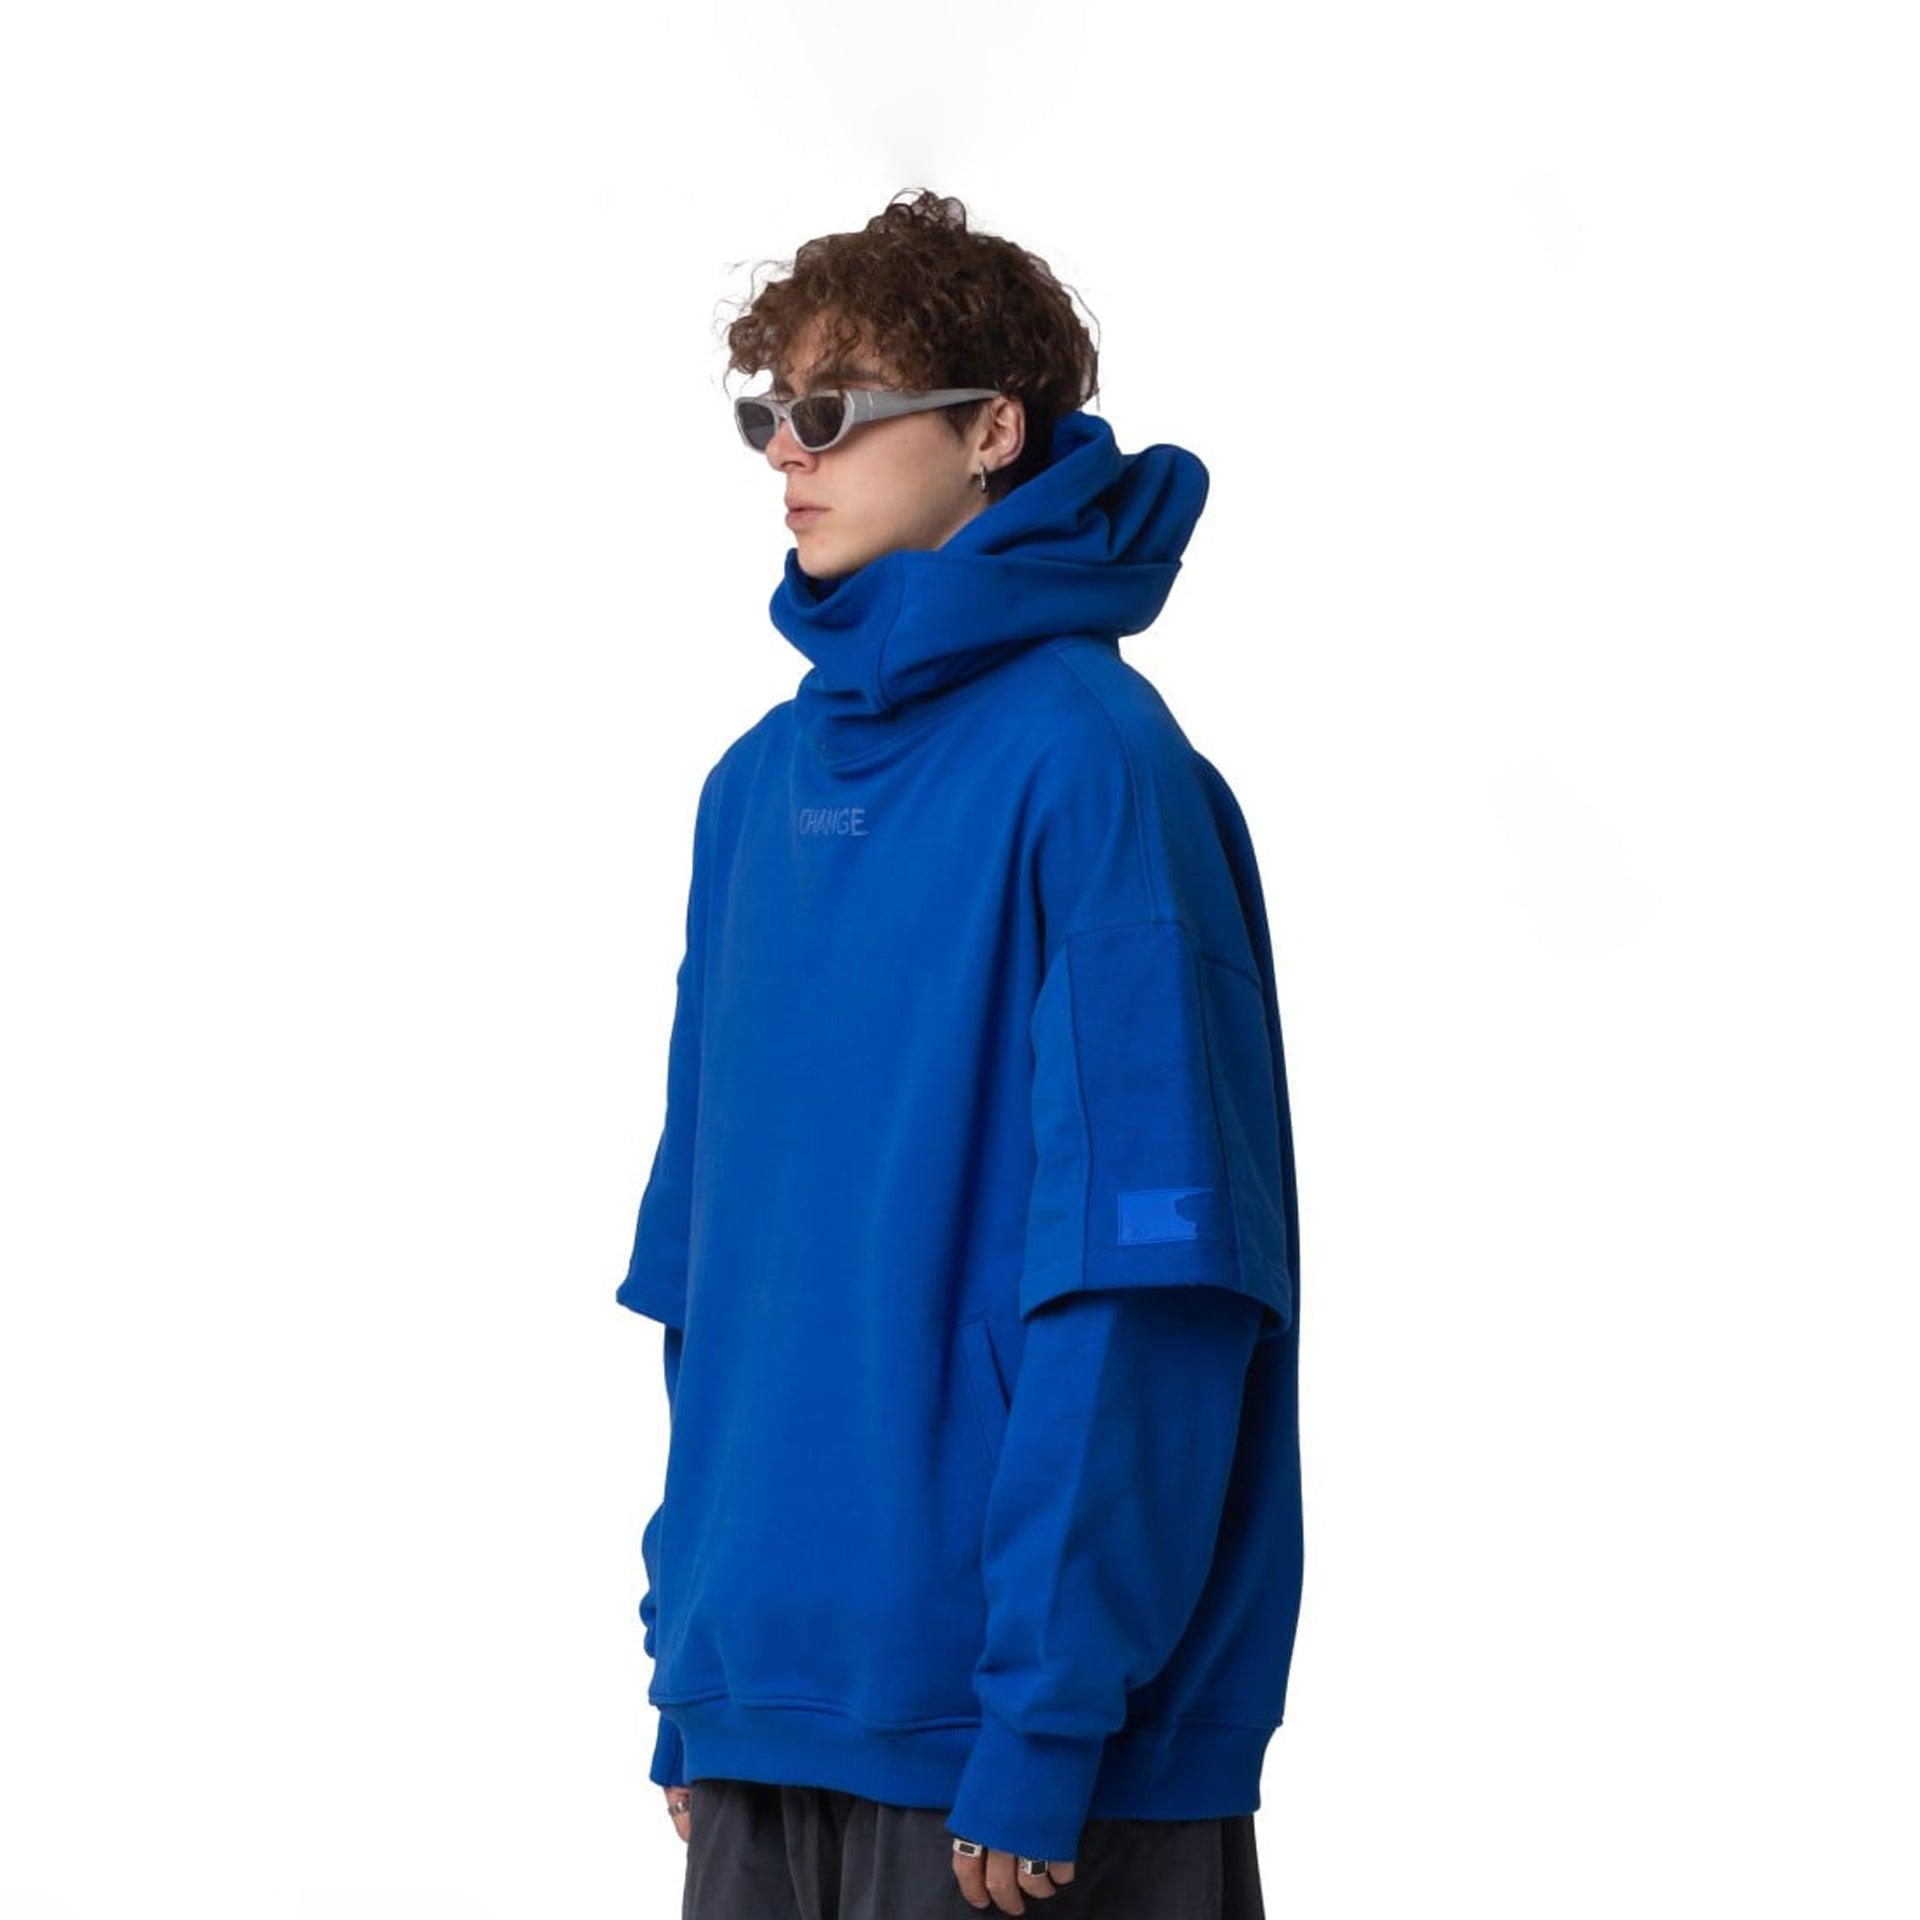 Blue Hoodie From S32 - WECRE8